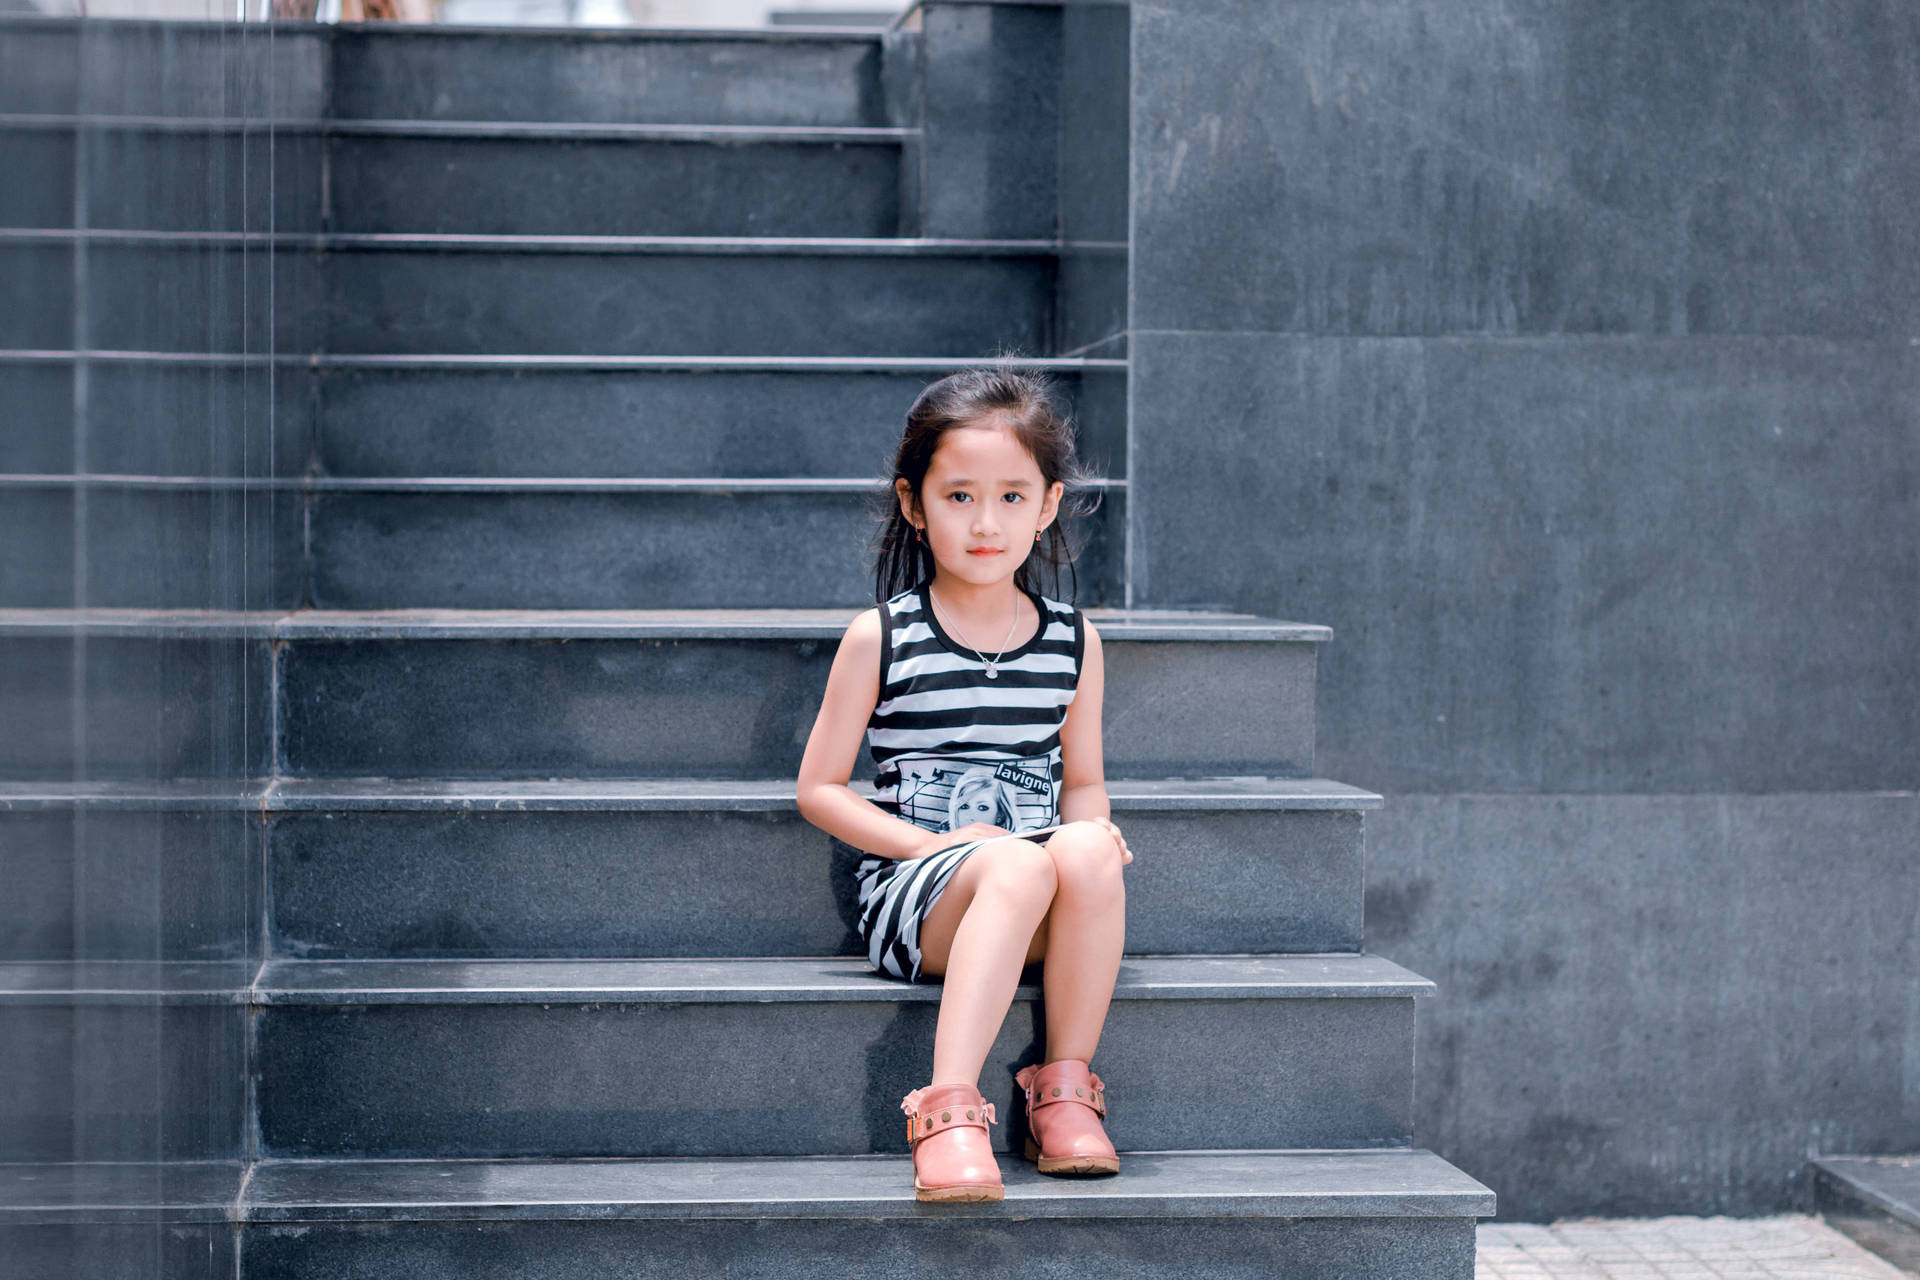 Innocent Glance - Adorable Girl On Grey Stairway